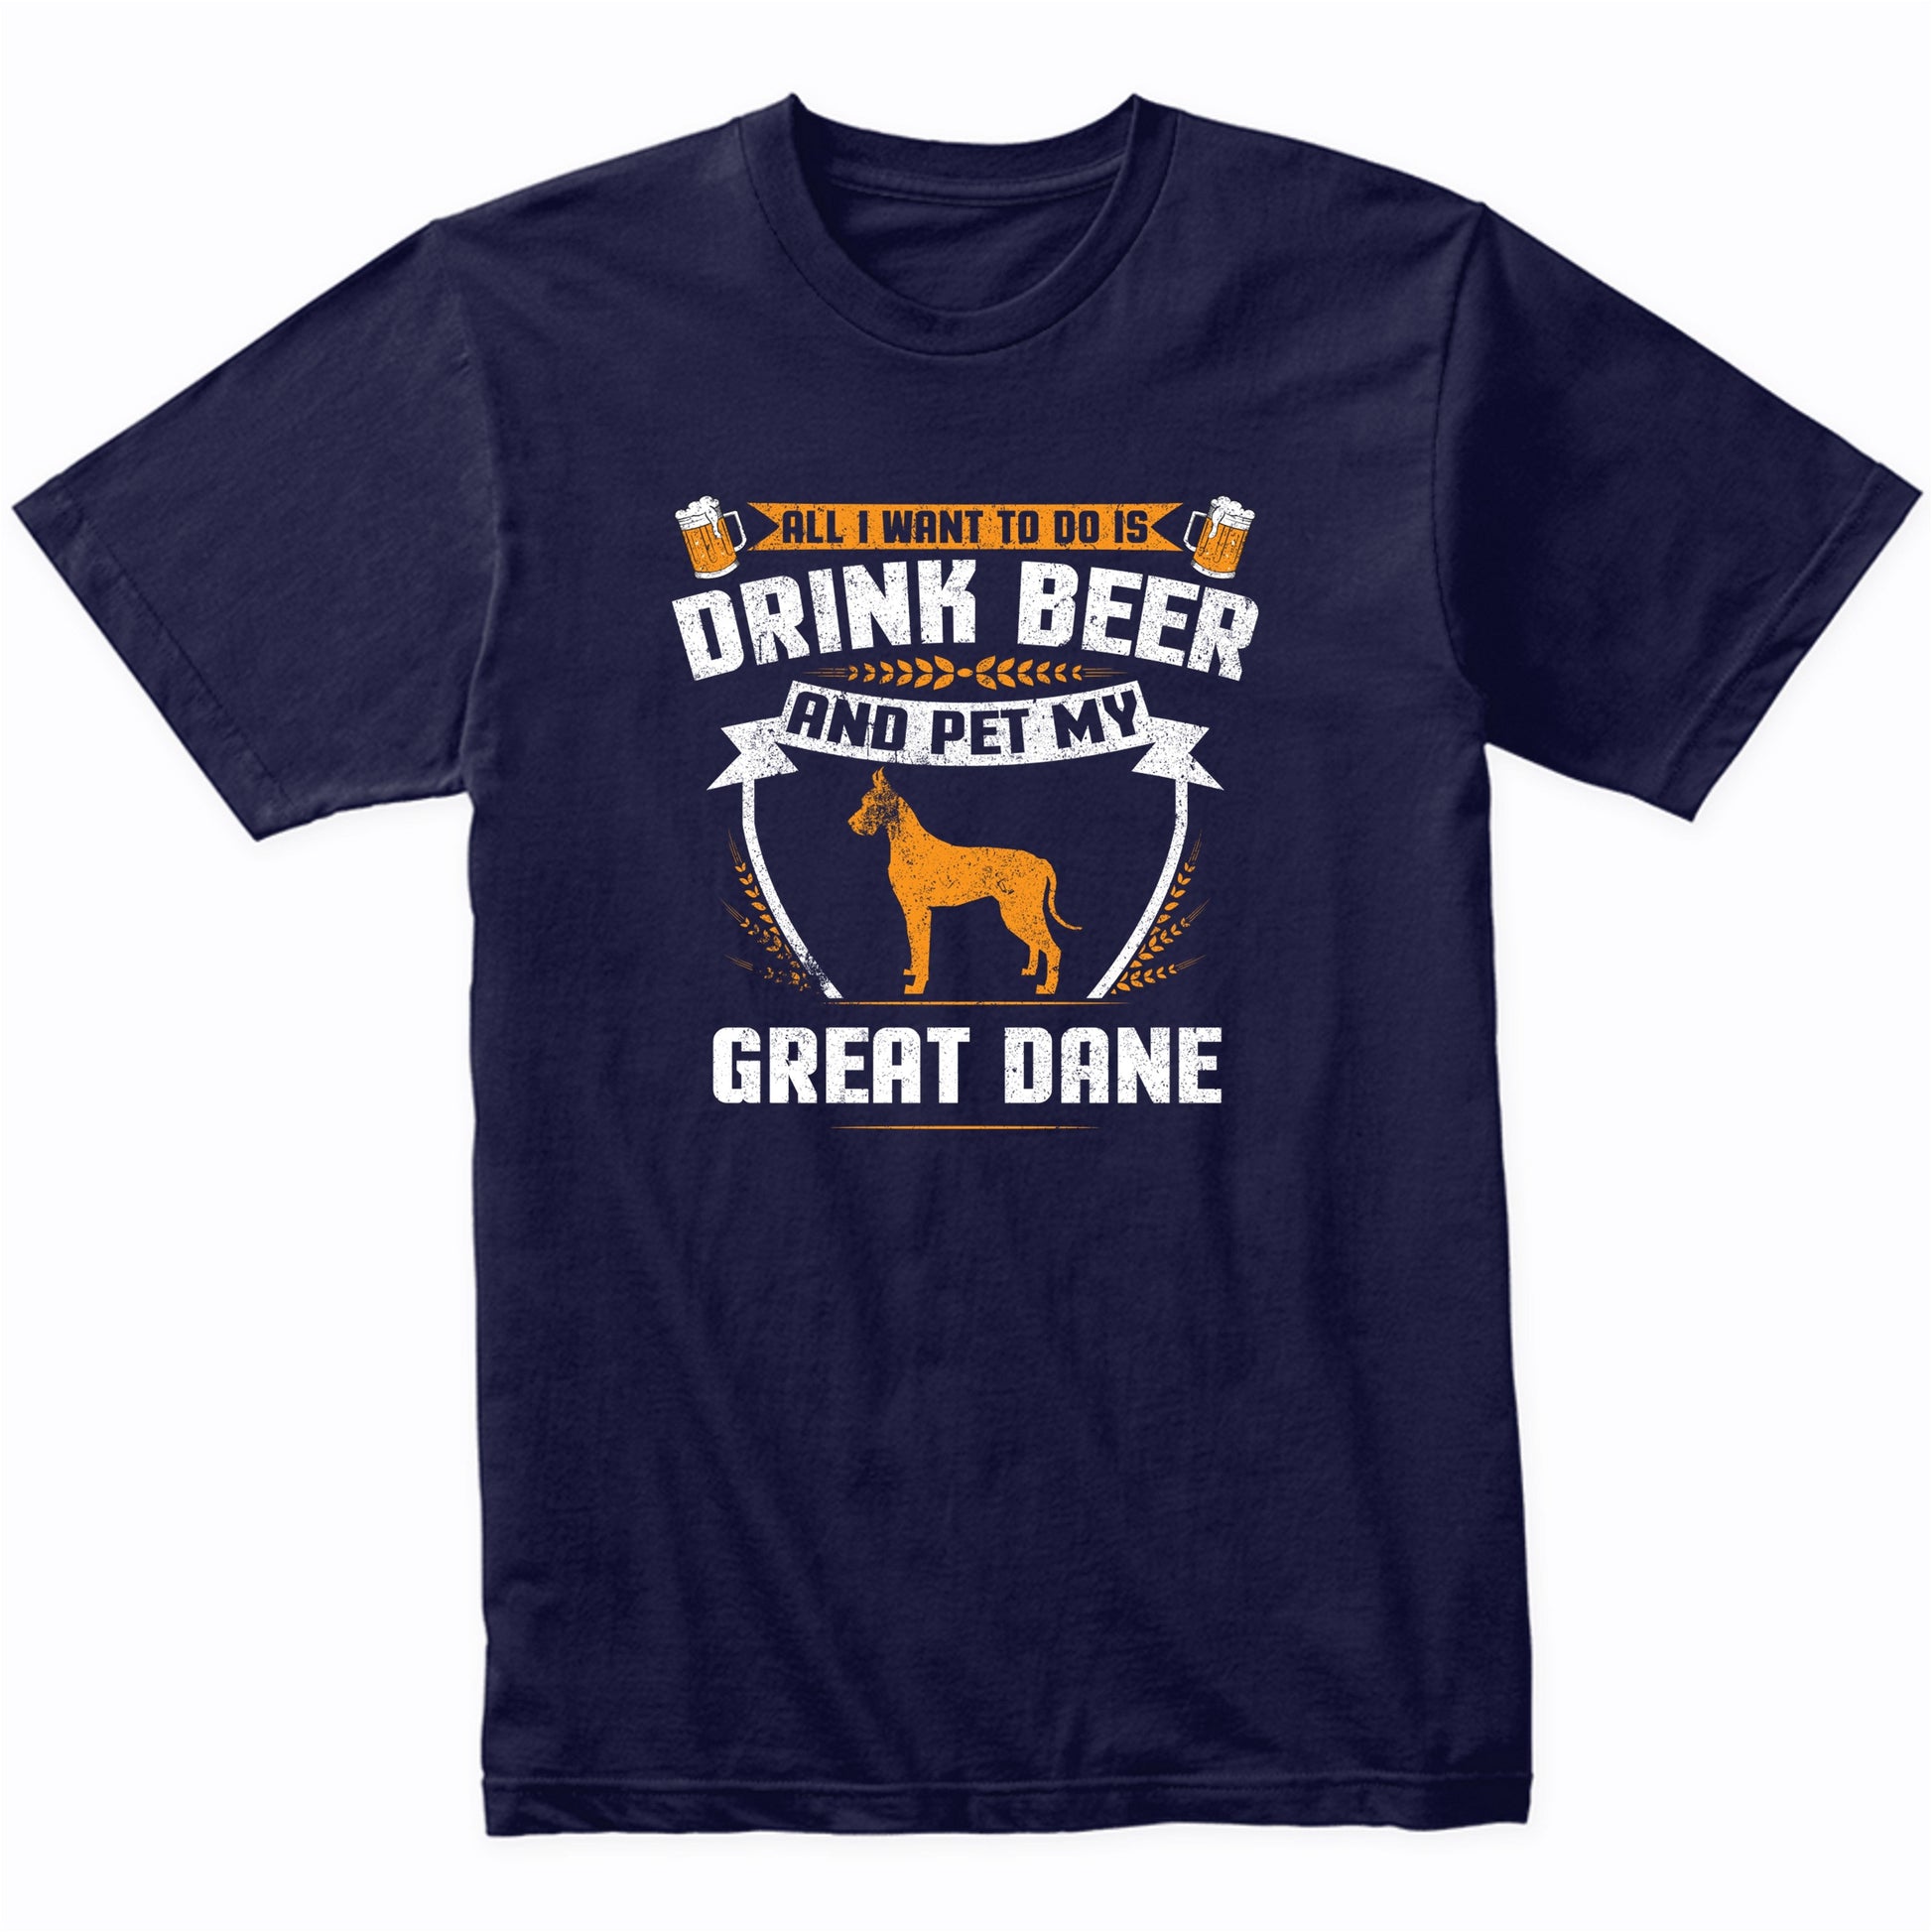 All I Want To Do Is Drink Beer And Pet My Great Dane Funny Dog Owner Shirt